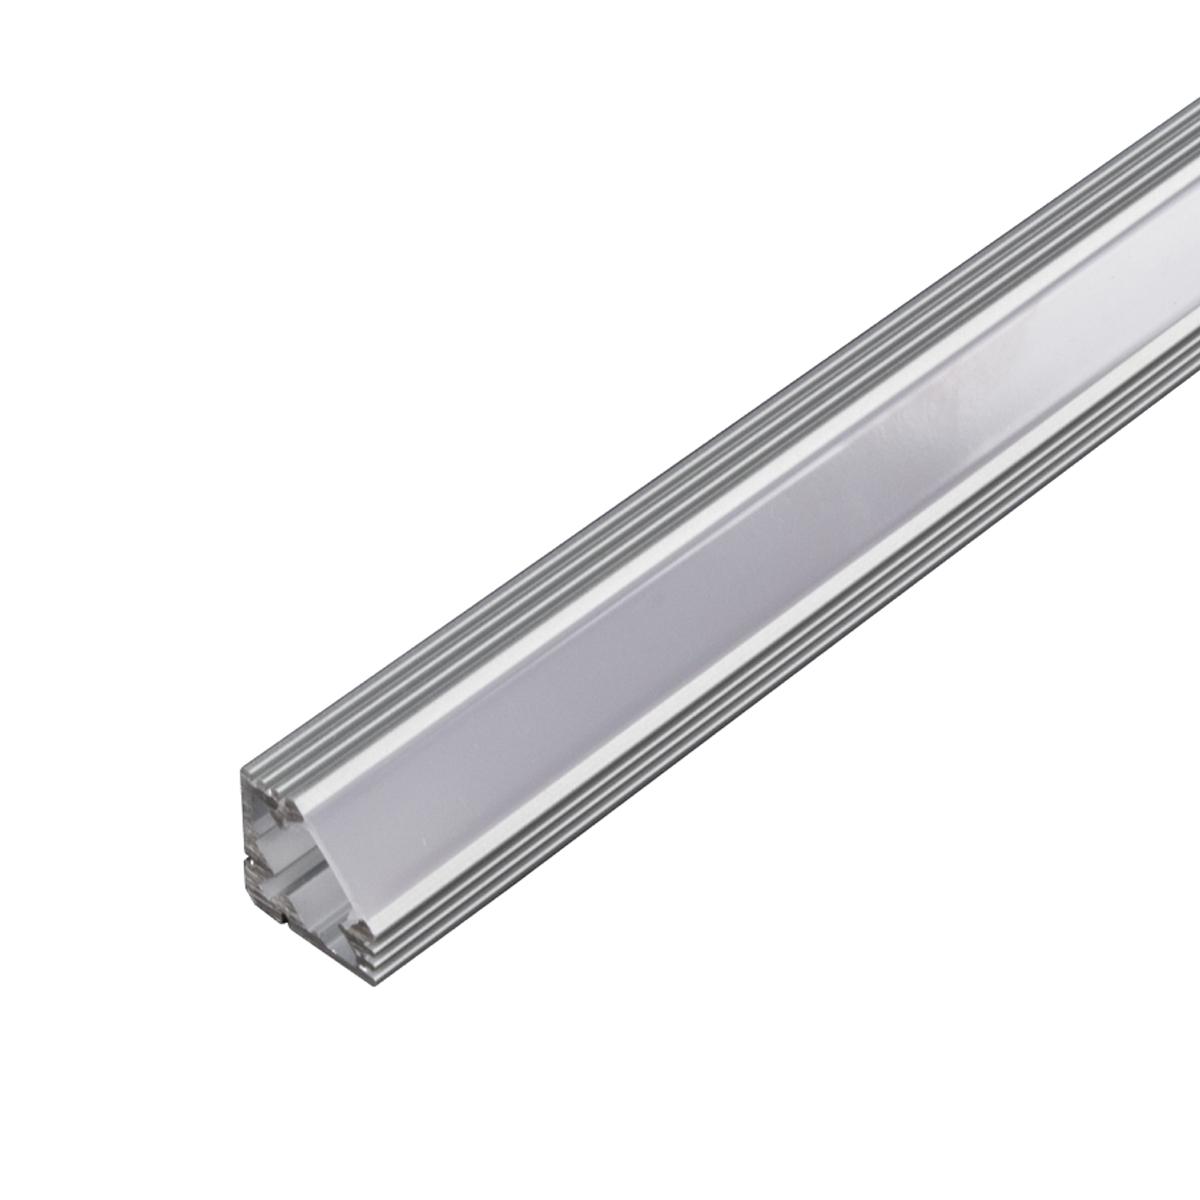 4ft Aluminum Channel for LED Strip and Tape Light, 45° Angle - Bees Lighting